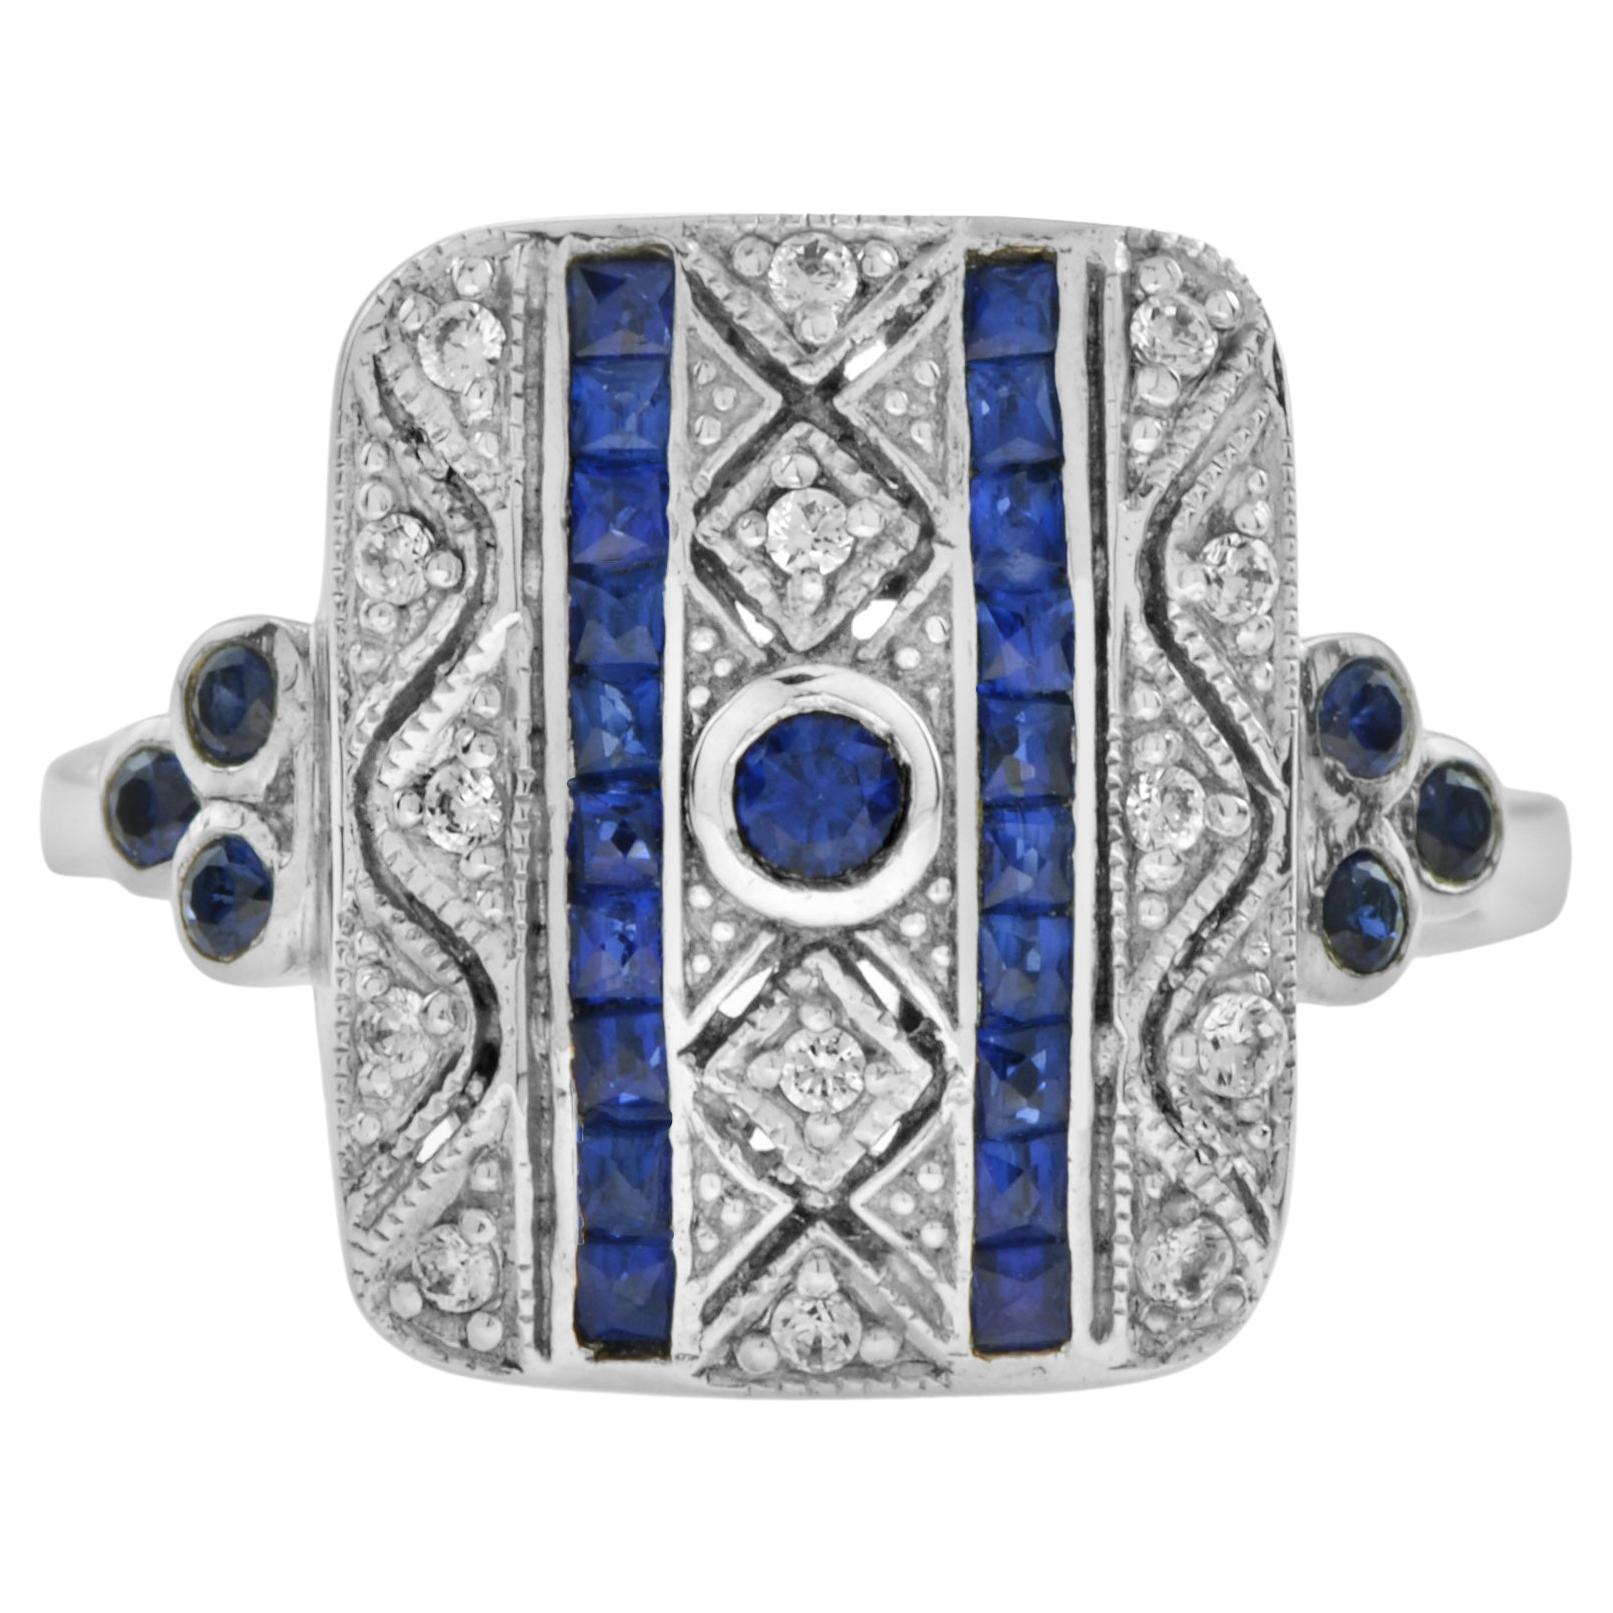 For Sale:  Art Deco Style Sapphire and Diamond Square Ring in 14K White Gold